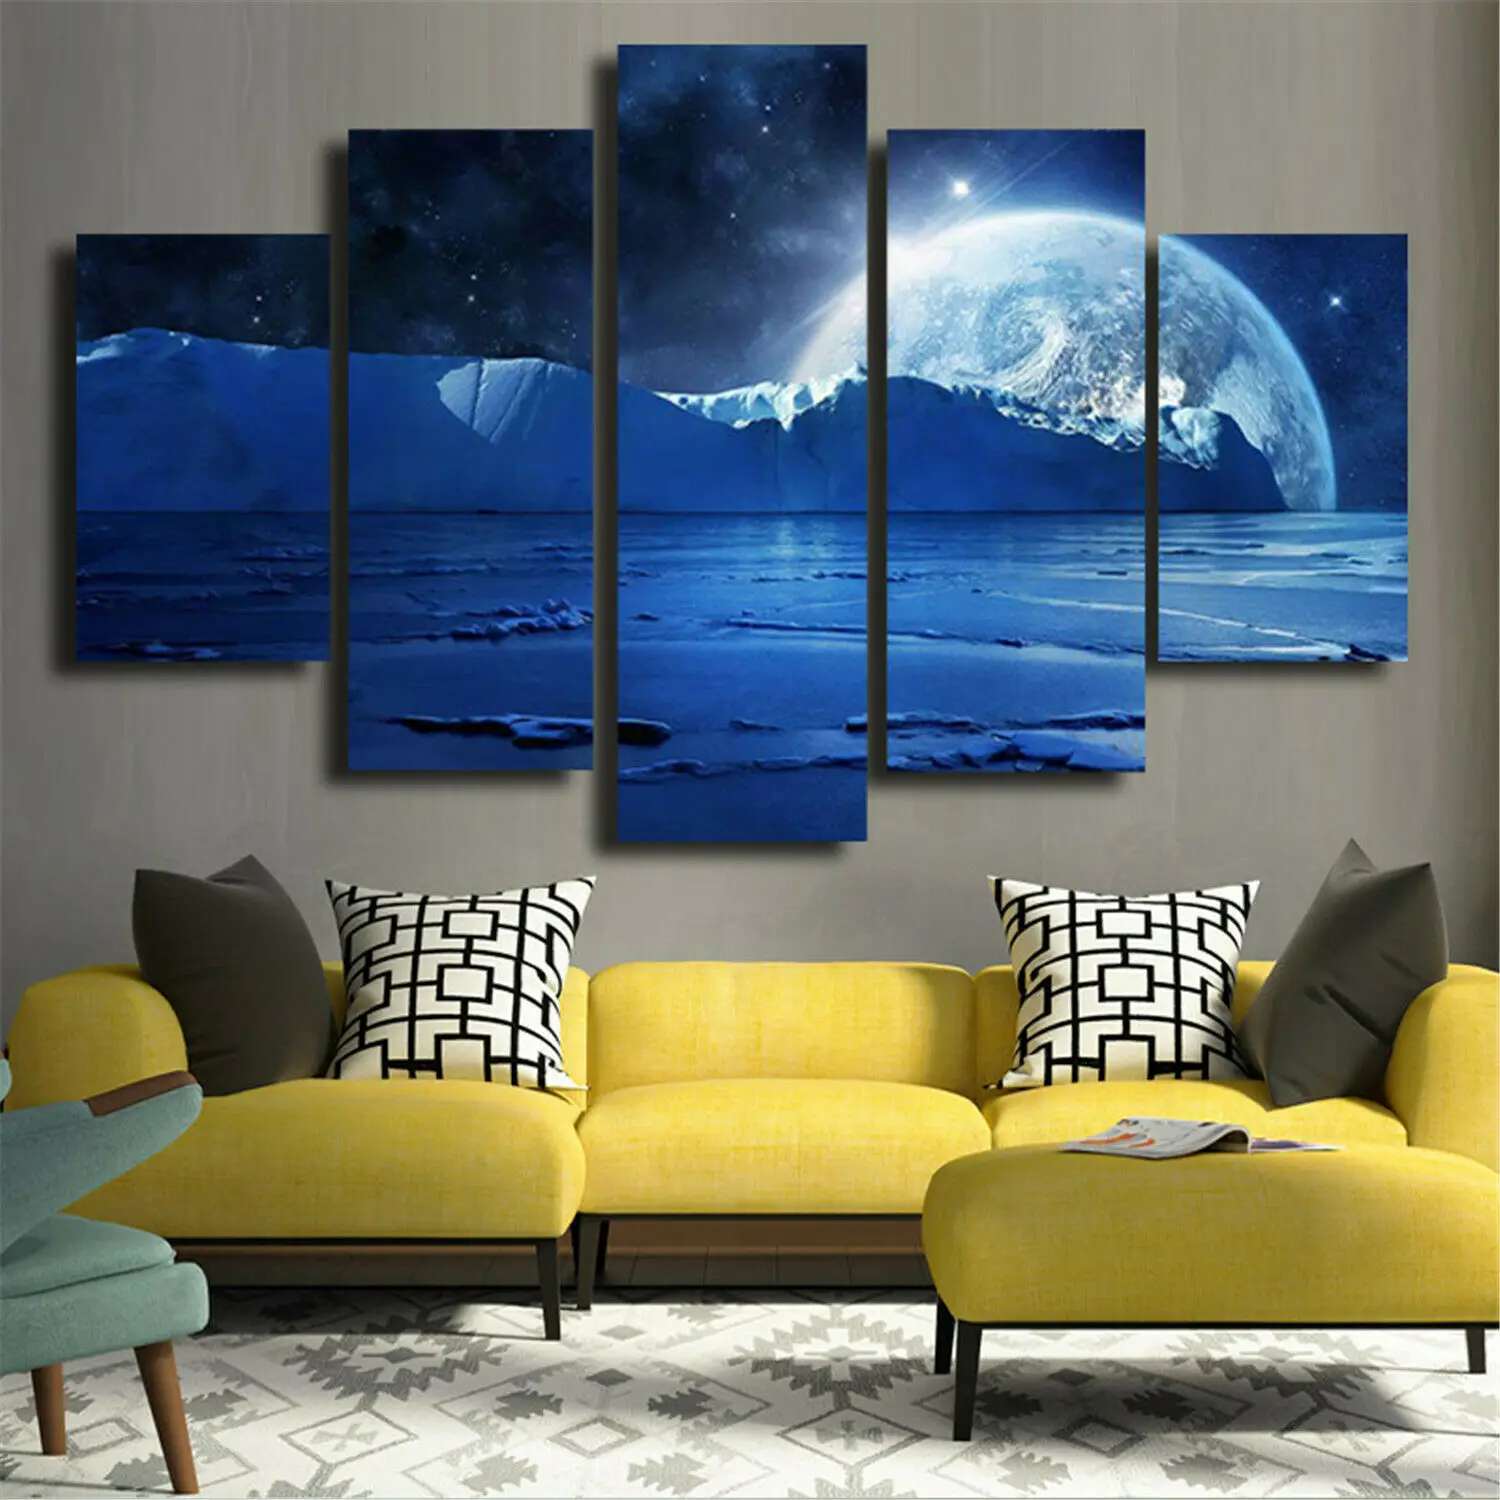 5 Panel Pictures HD Print Canvas Wall Art Poster Living Room Blue Planet Room Decor Paintings Home Decor No Framed 5 Pieces